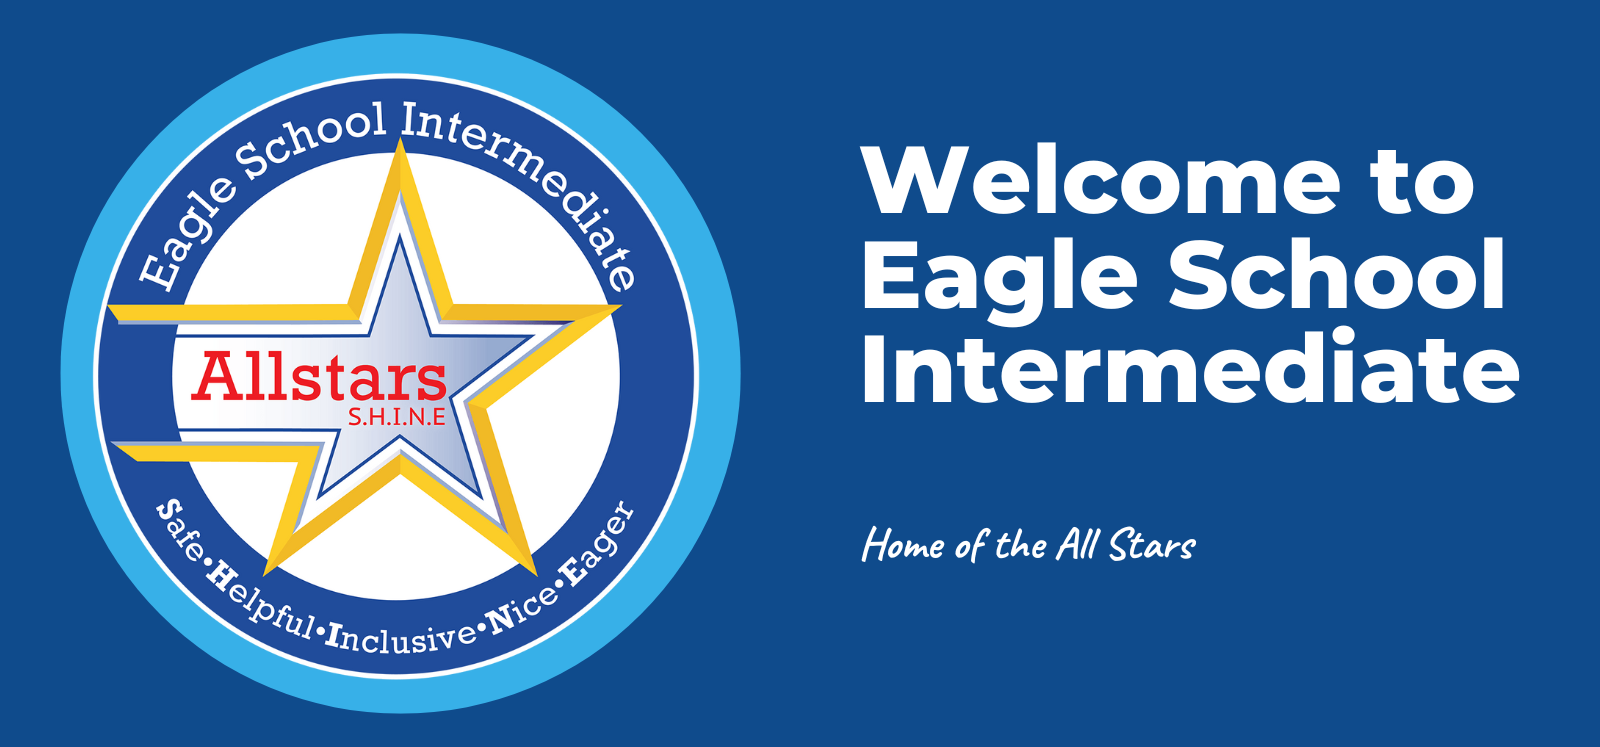 image of banner that says welcome to eagle school intermediate home of the all stars